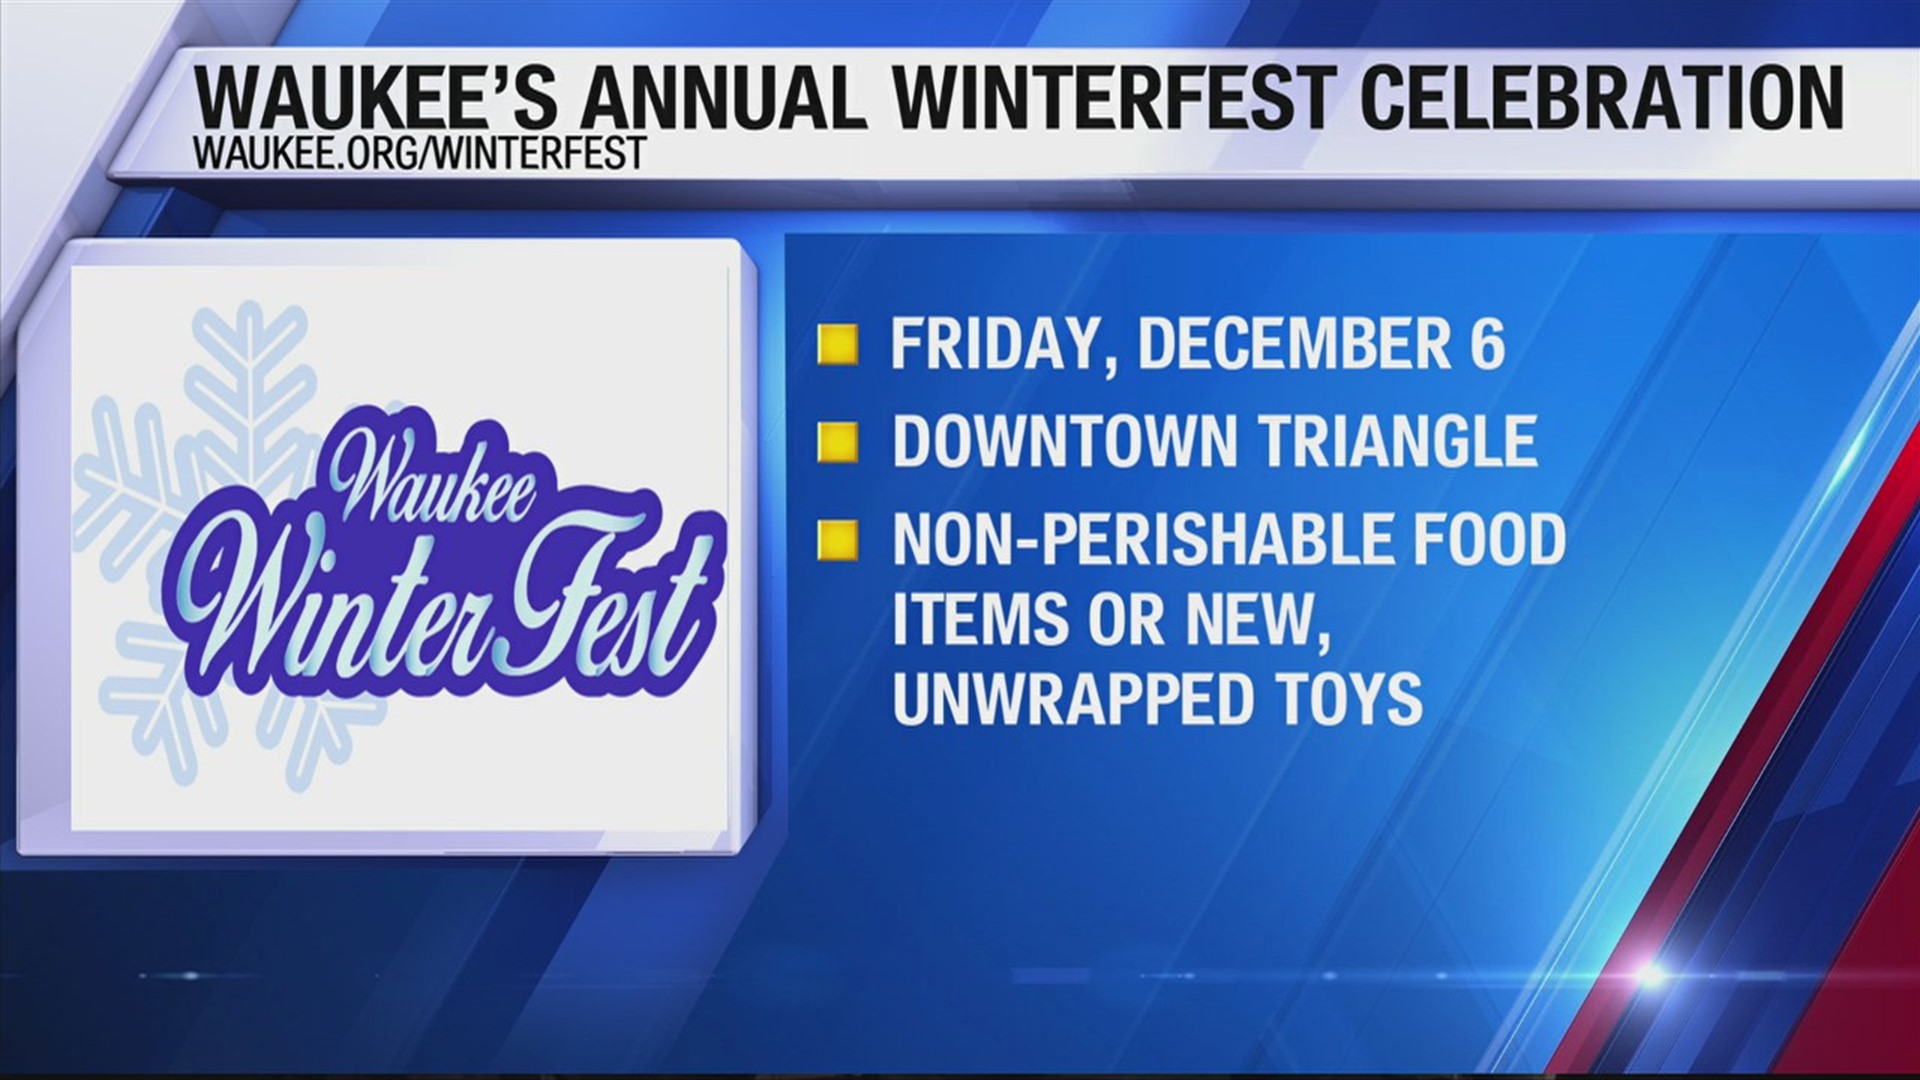 Santa's coming to town this Friday as Waukee holds their free annual WinterFest celebration in the Downtown Triangle.